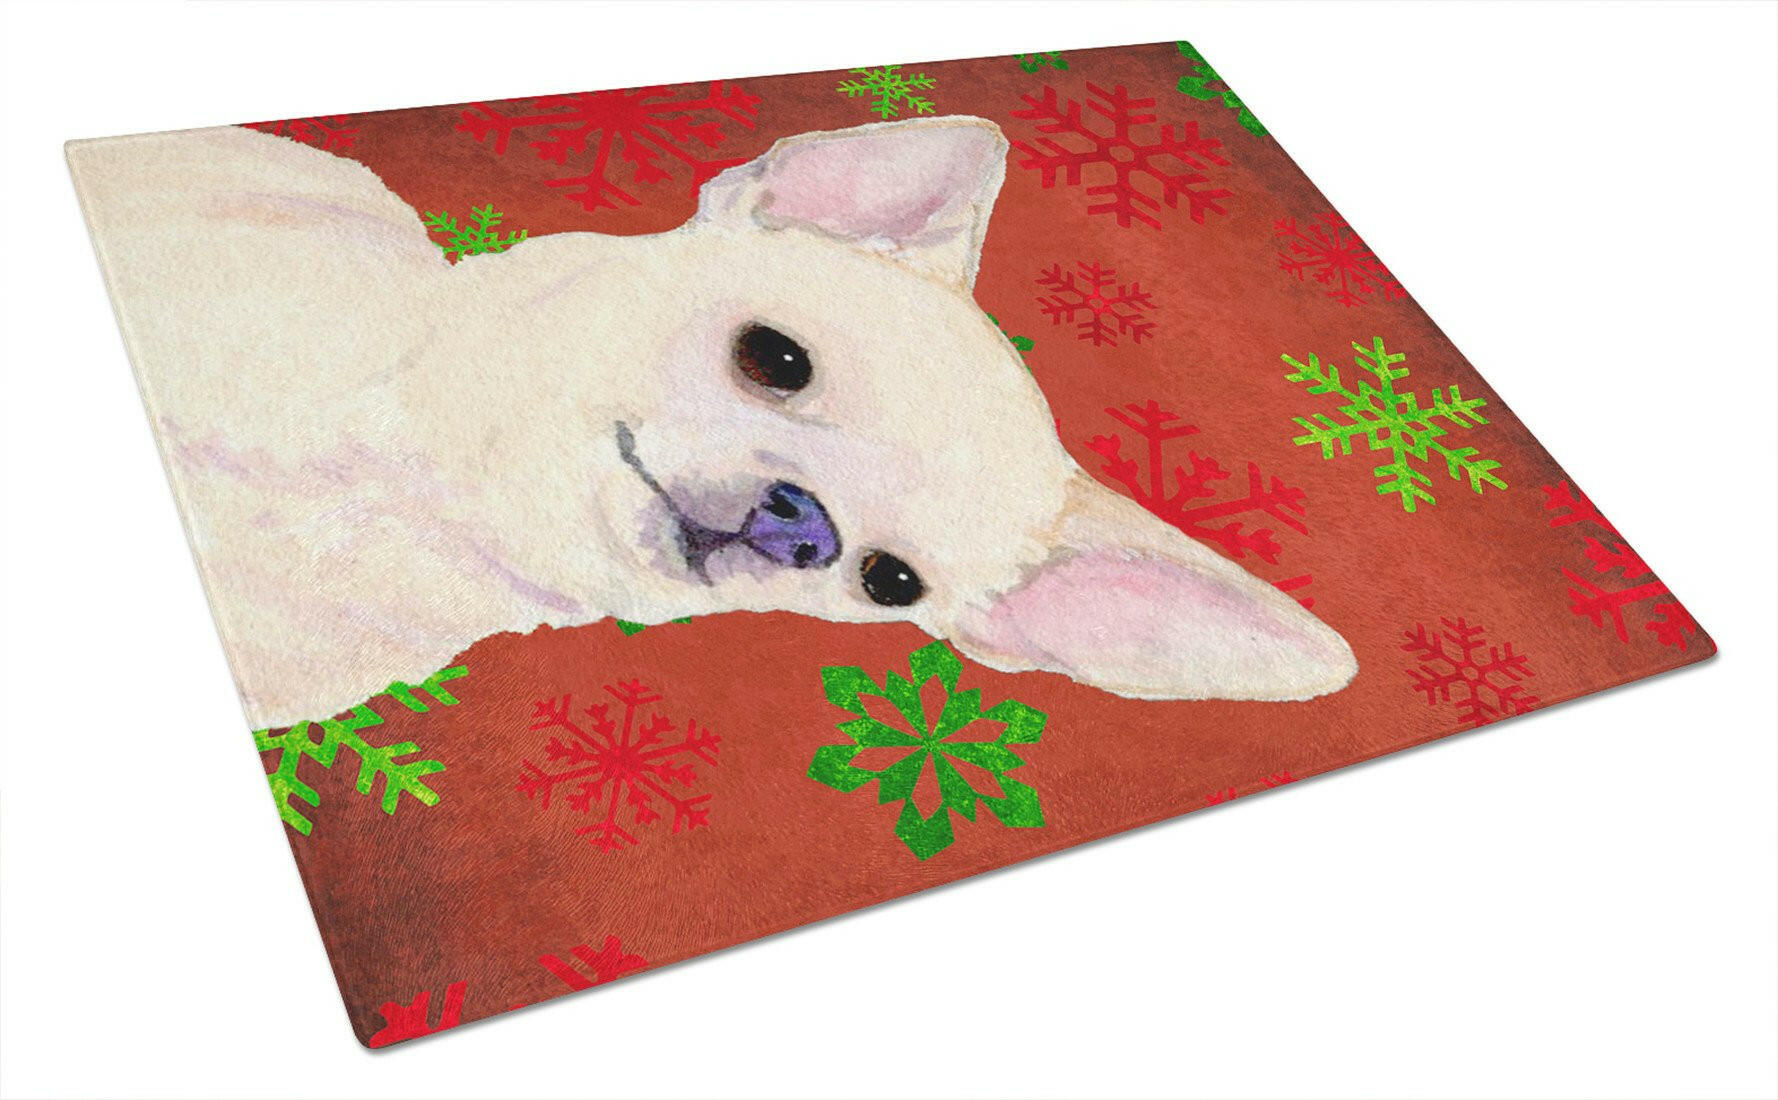 Chihuahua Red and Green Snowflakes Holiday Christmas Glass Cutting Board Large by Caroline's Treasures